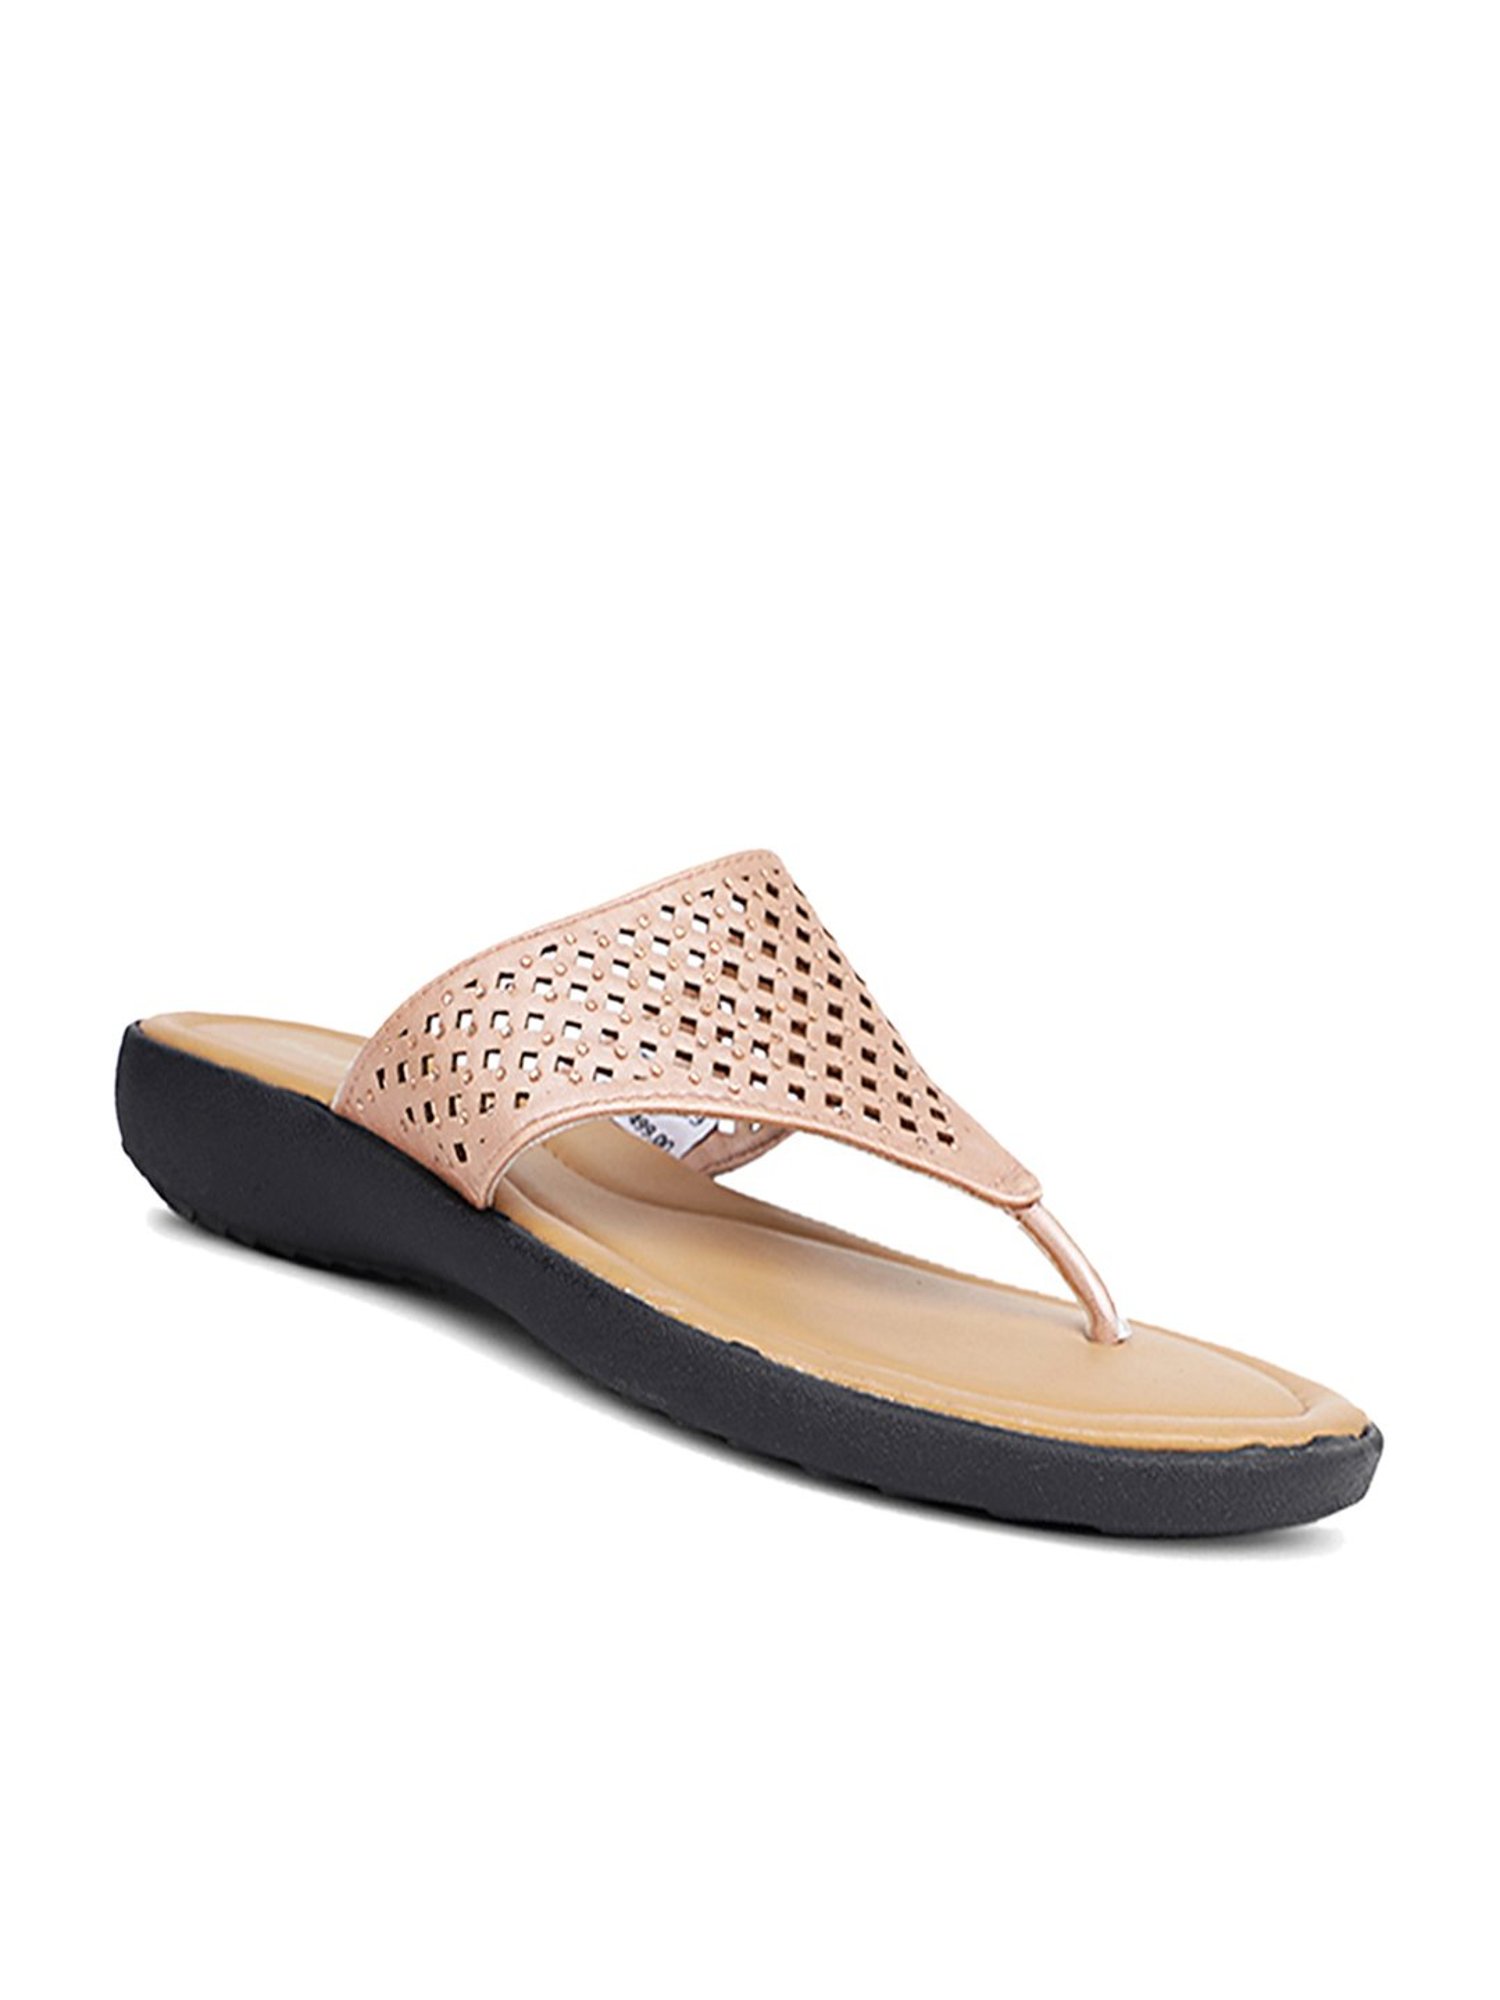 Women's Orthopedic Sandals with Arch Support | Orthofeet